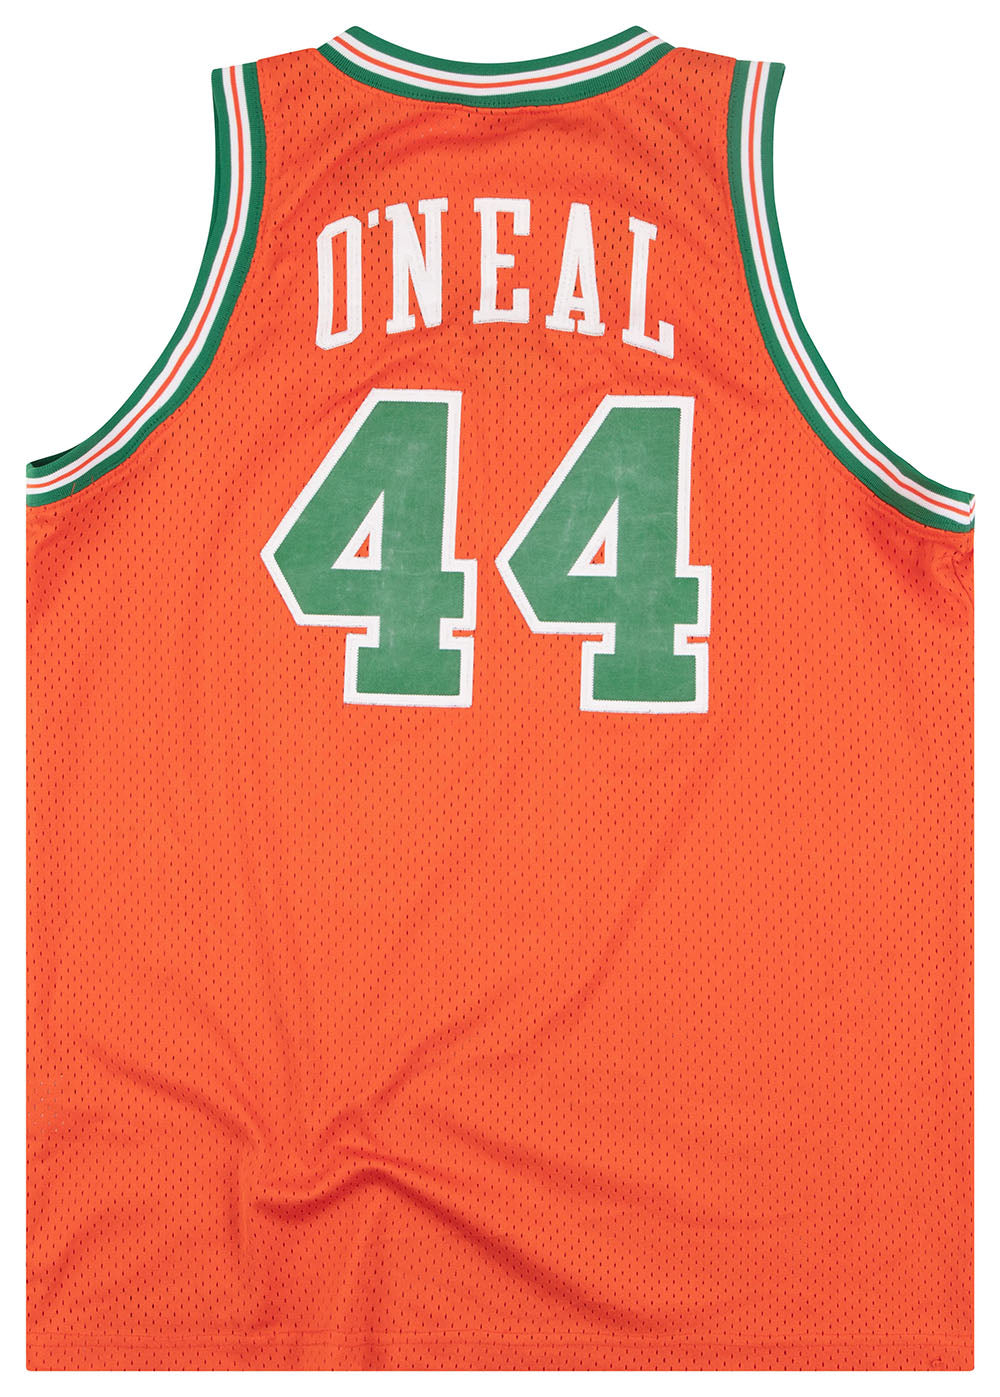 1999 AUTHENTIC EAU CLAIRE HIGH SCHOOL O'NEAL #44 NIKE JERSEY (HOME) L